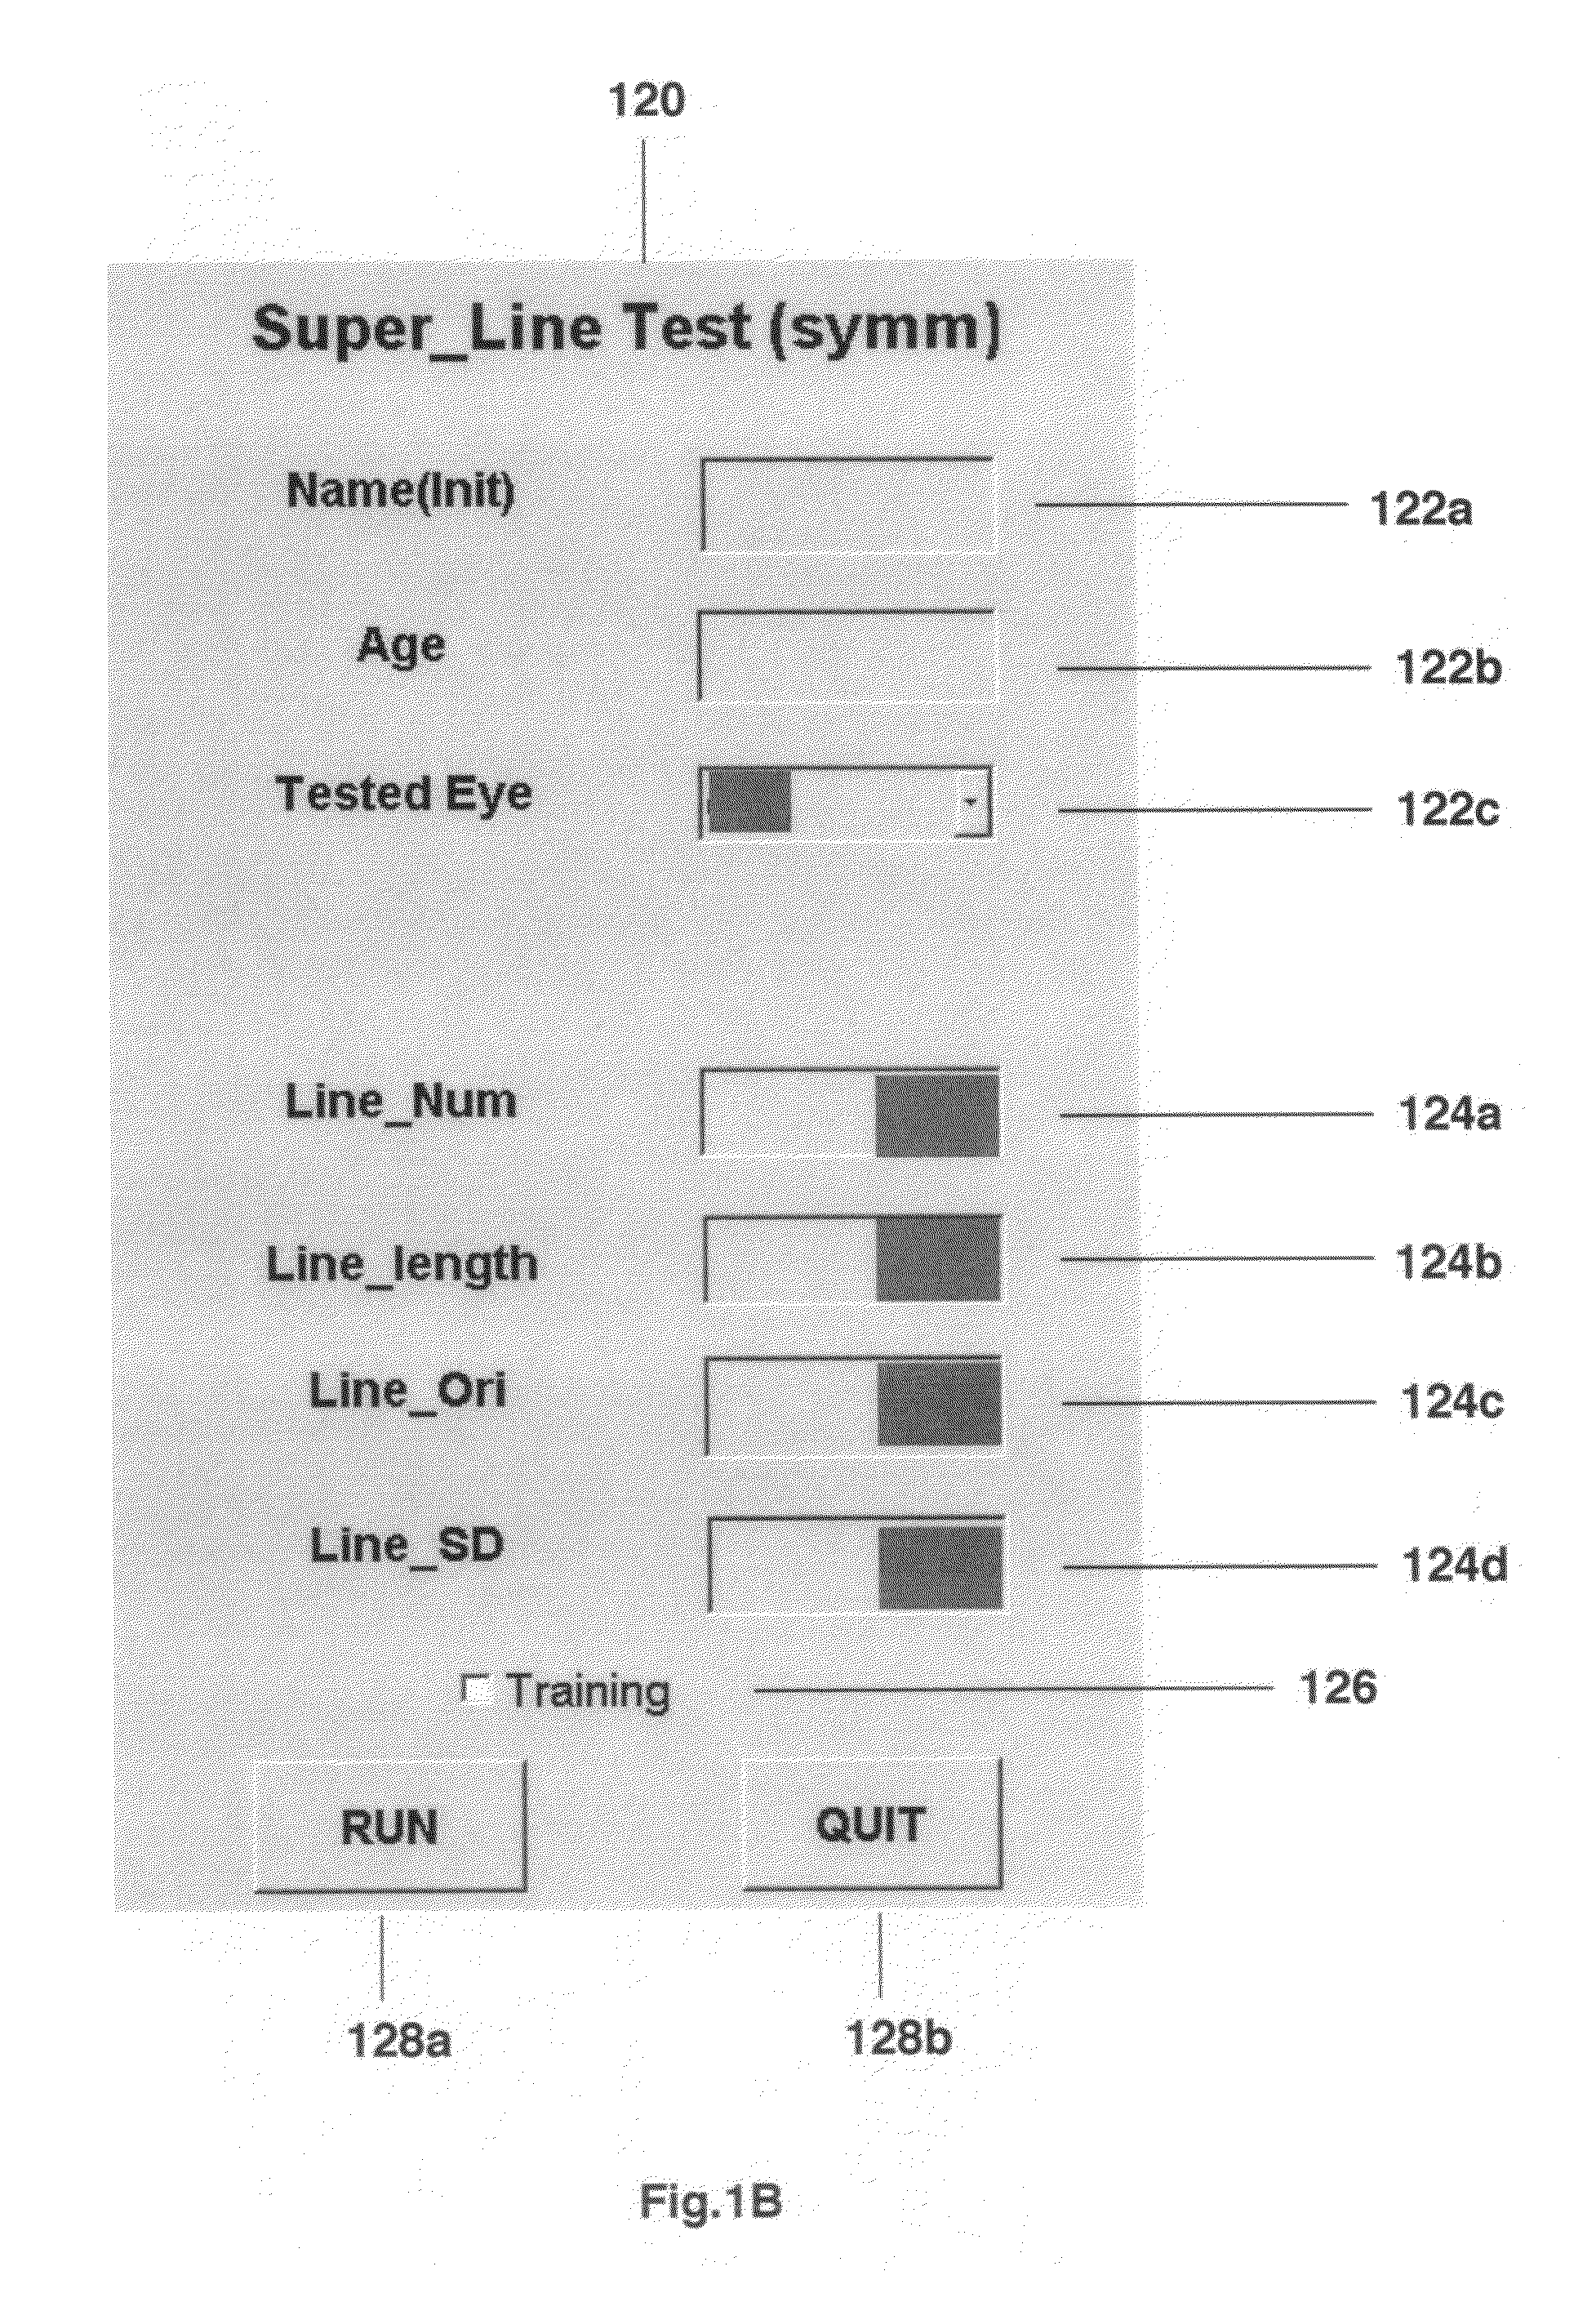 System and method for detecting central retinal distortions associated with macular diseases